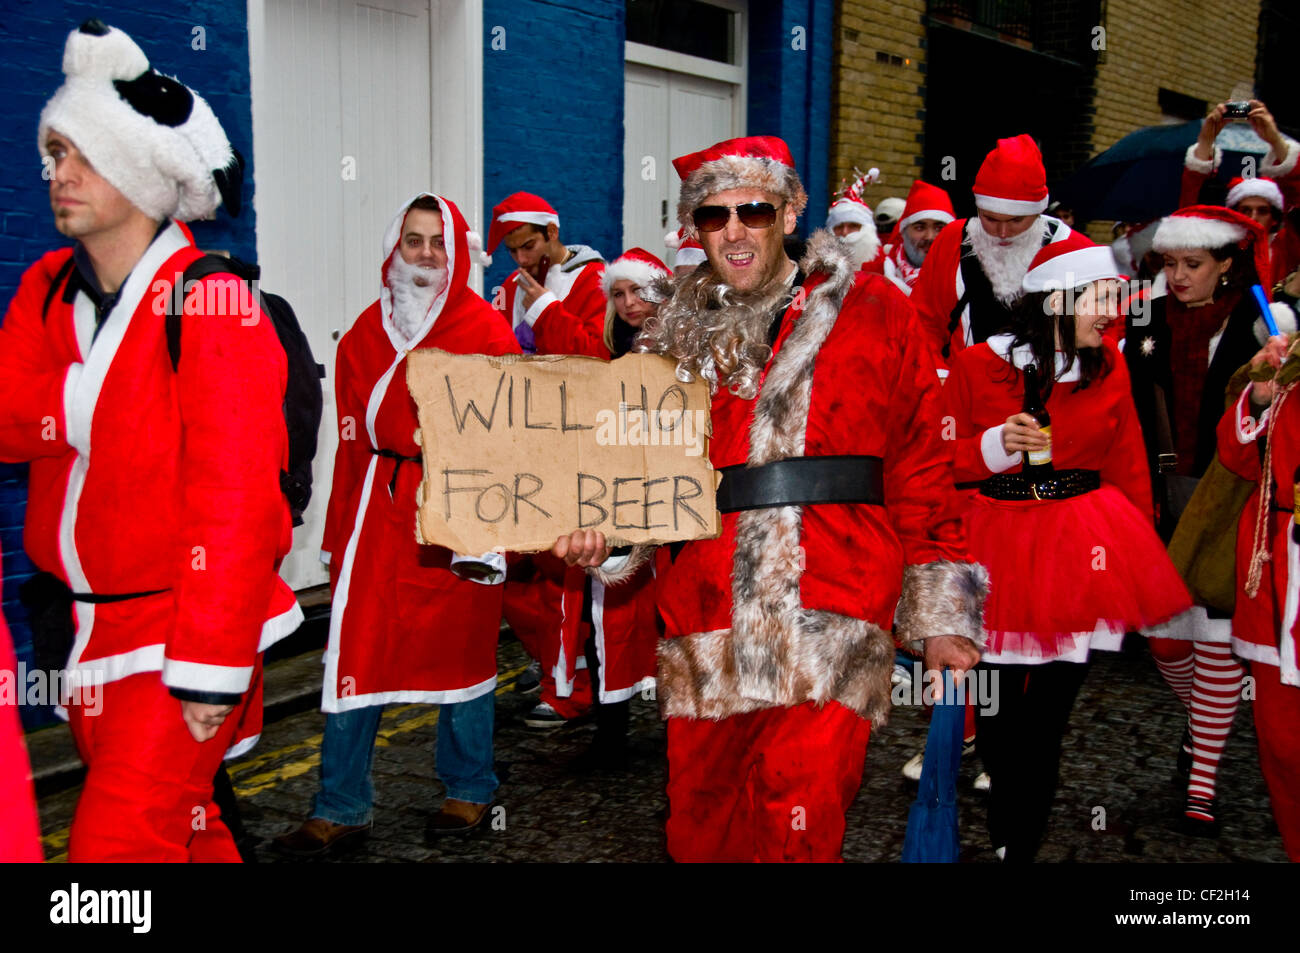 A march along the South Bank in London by people dressed as Santa Claus. Stock Photo